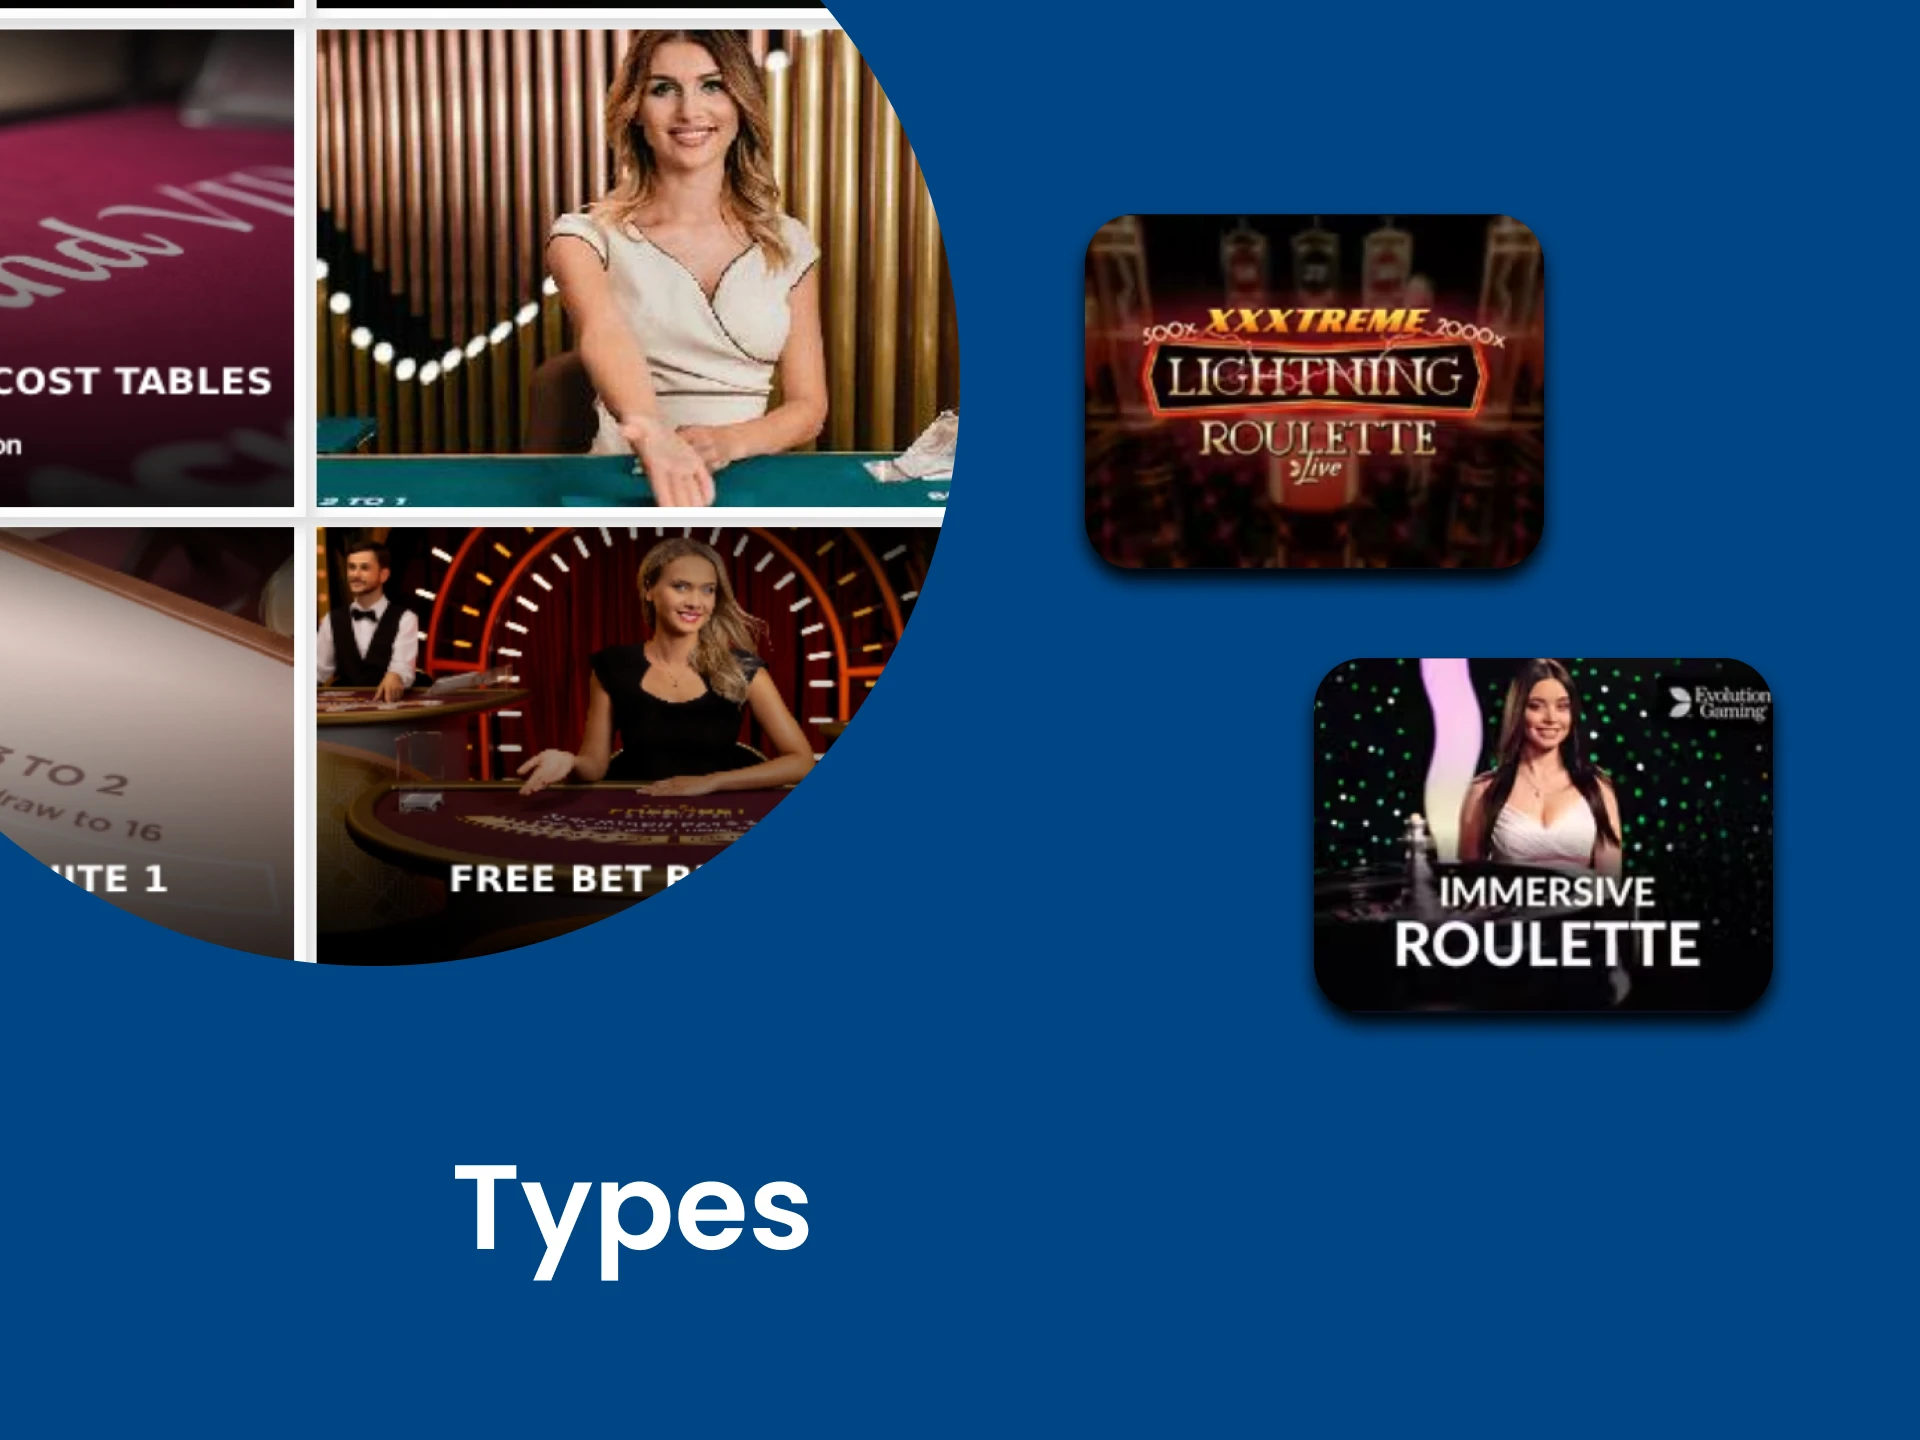 Find out which types of roulette are the most popular.